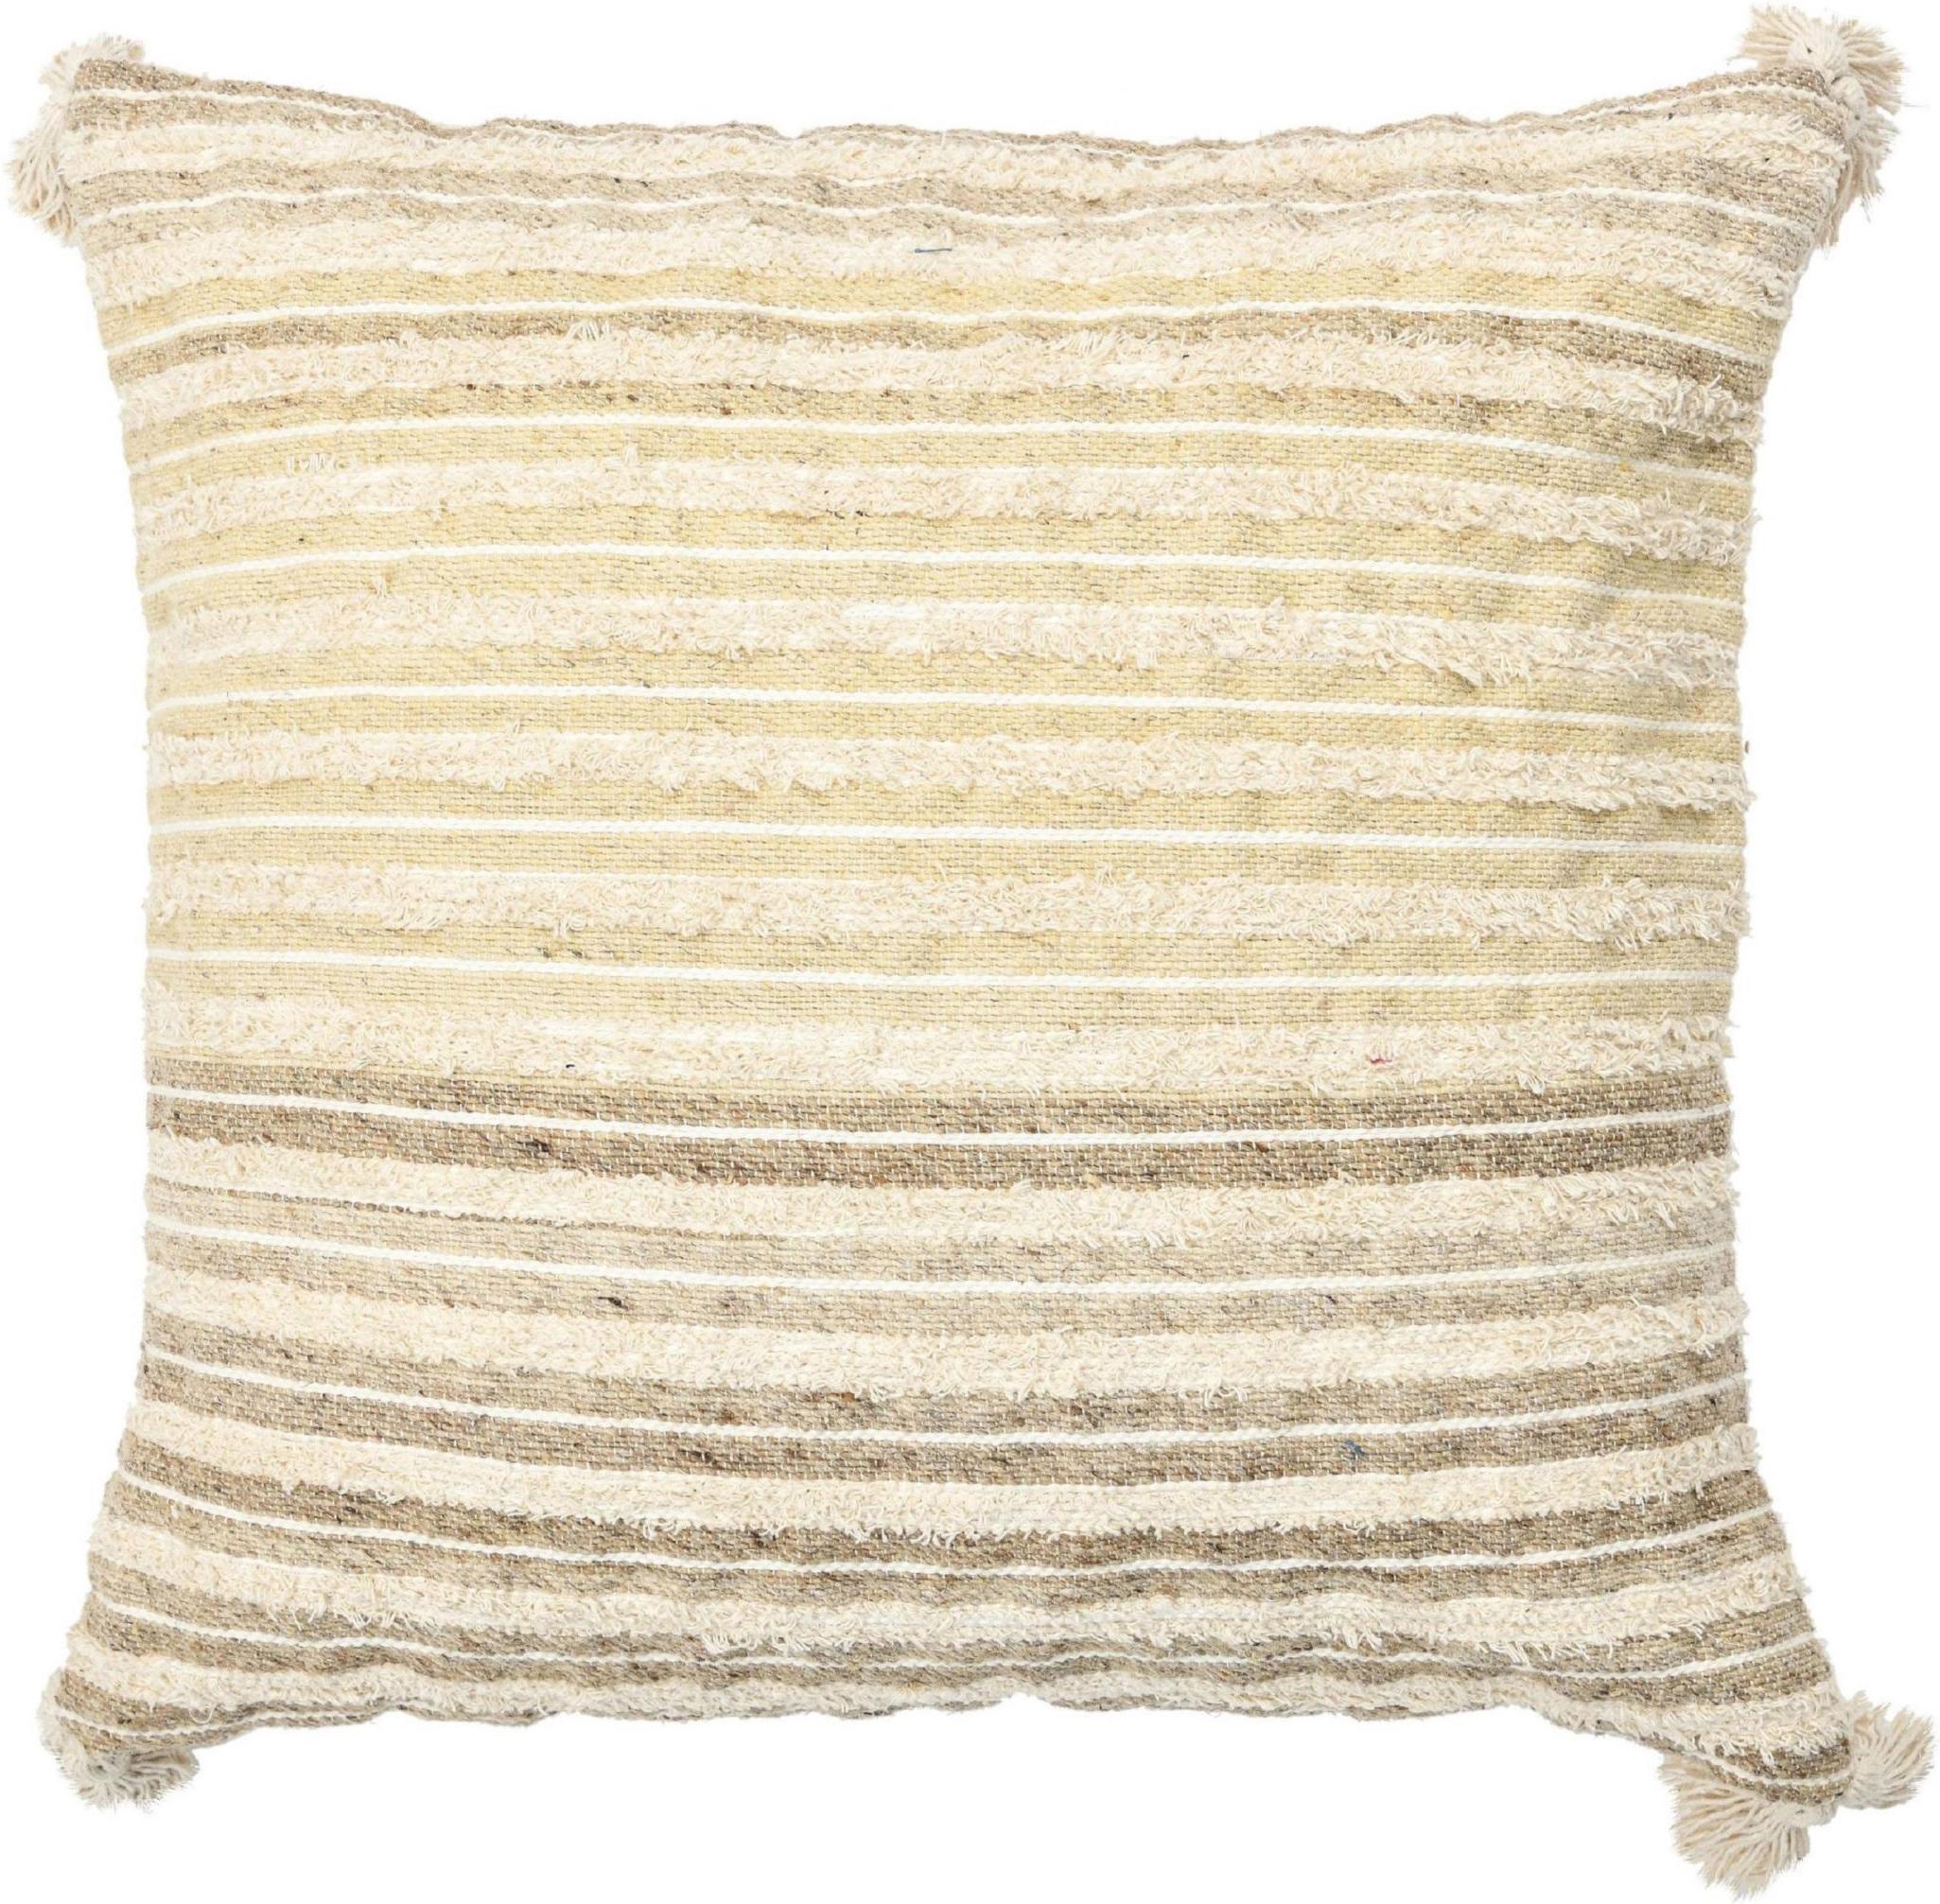 Hand-Knotted Boho Chic Style Modern Wool and Cotton Pillow In Beige For Sale